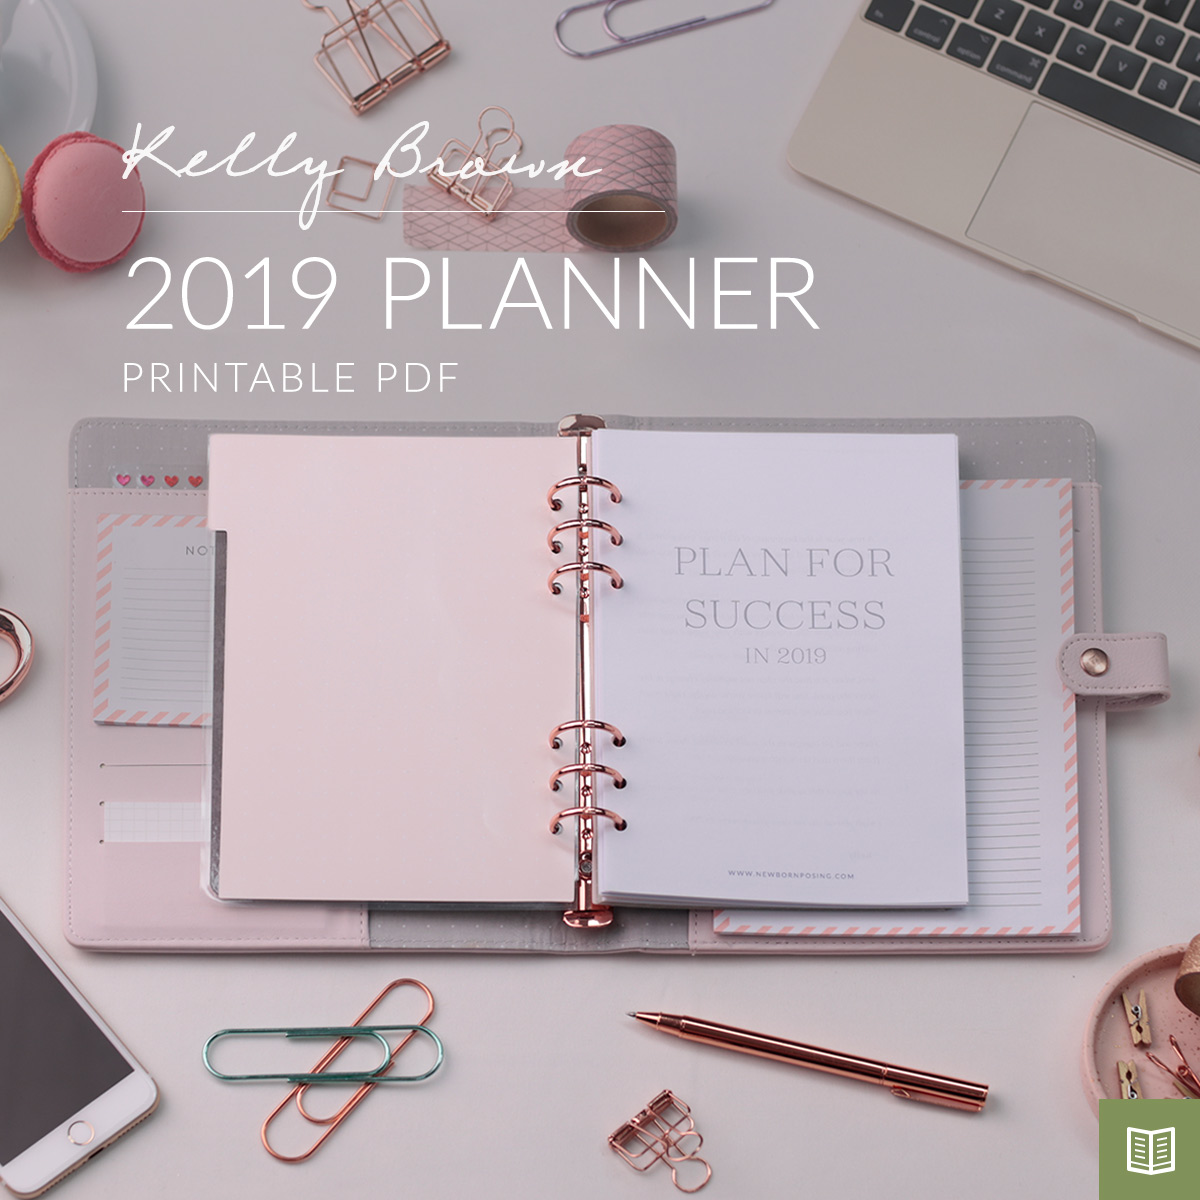 Newborn posing planner for photographers 2019 kelly brown